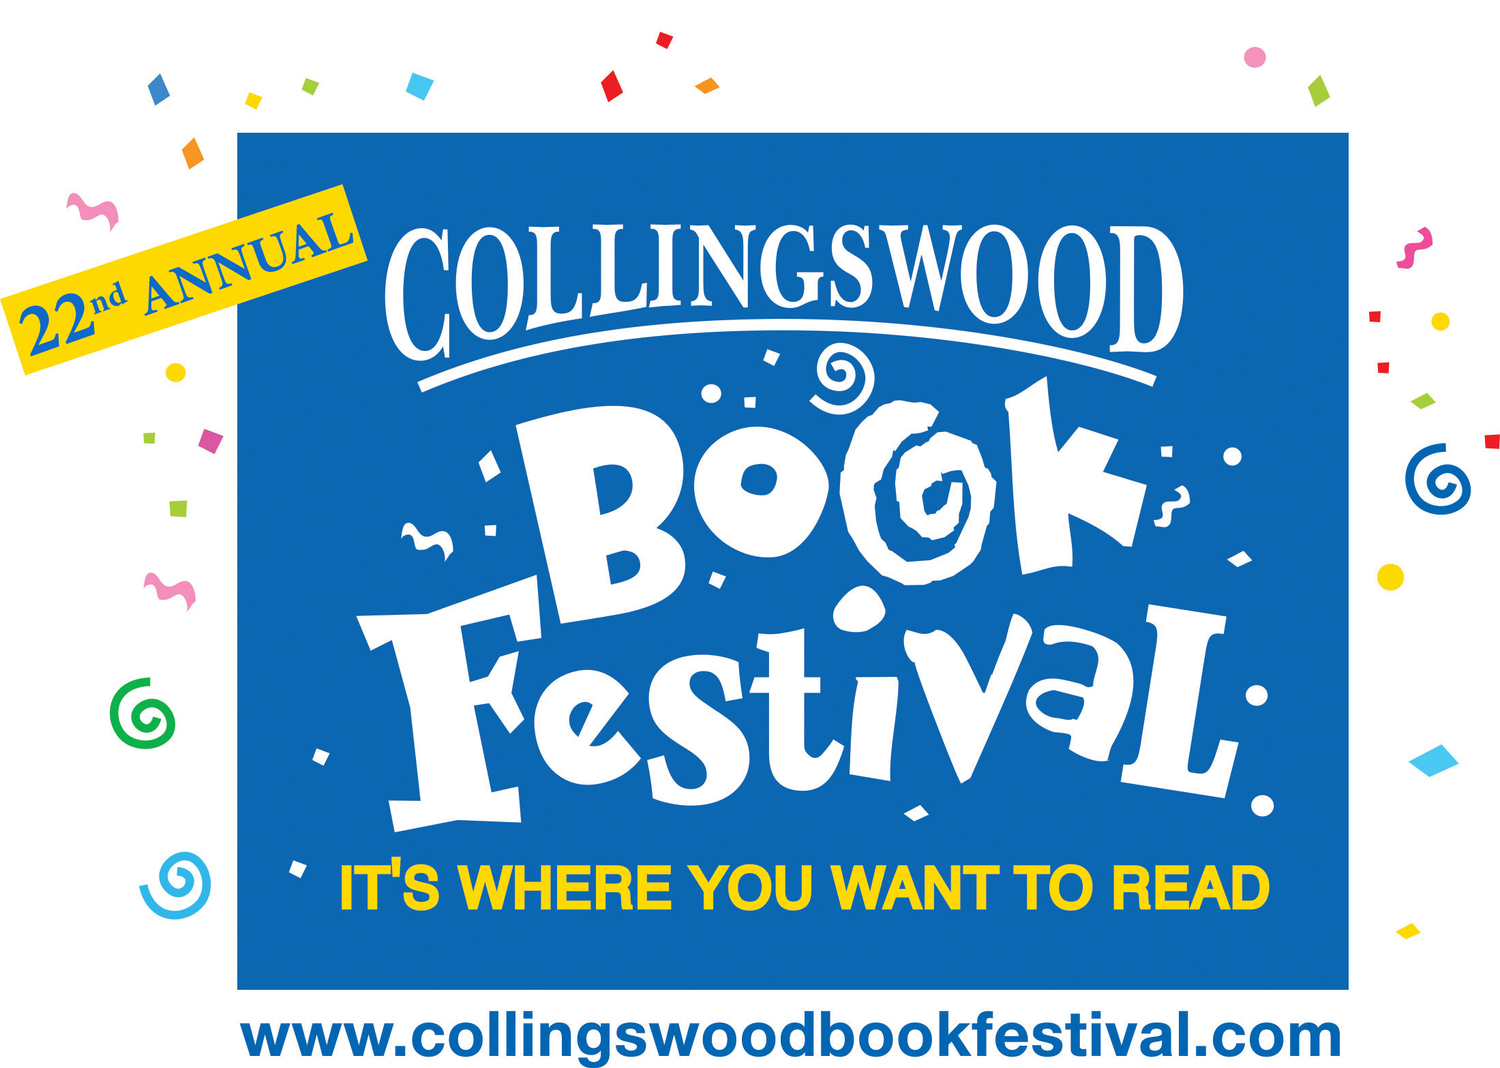 COLLINGSWOOD BOOK FESTIVAL